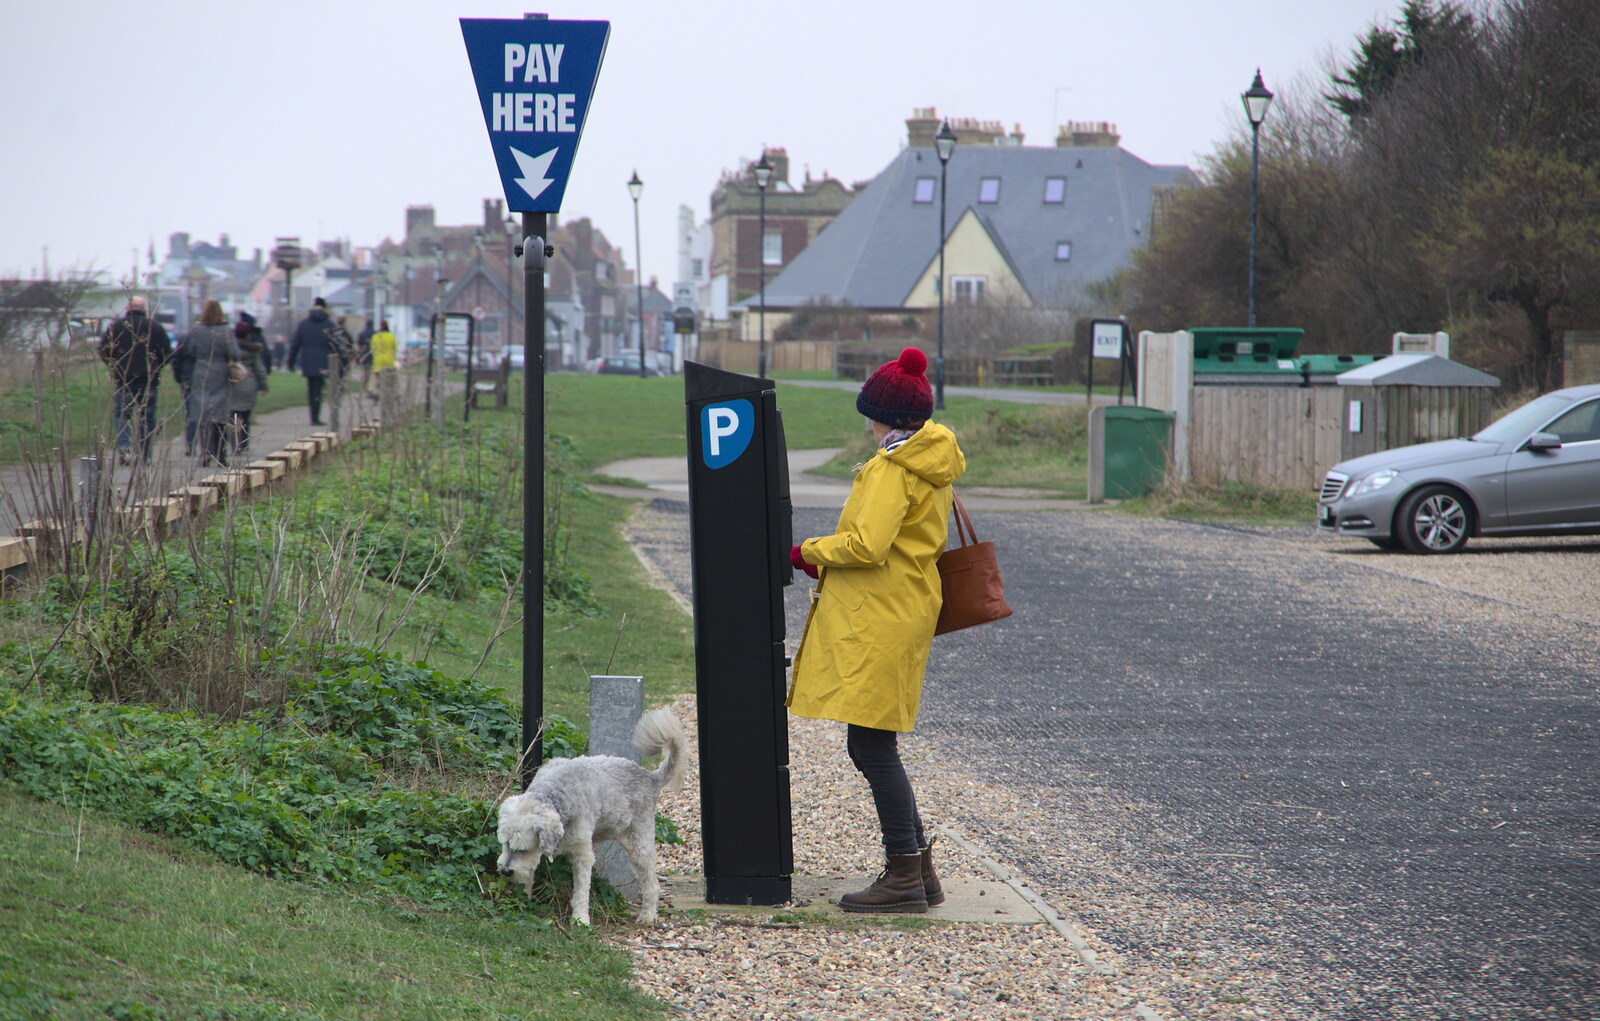 Isobel pays for parking as a dog cocks its leg from A Postcard from Aldeburgh, Suffolk - 6th January 2019